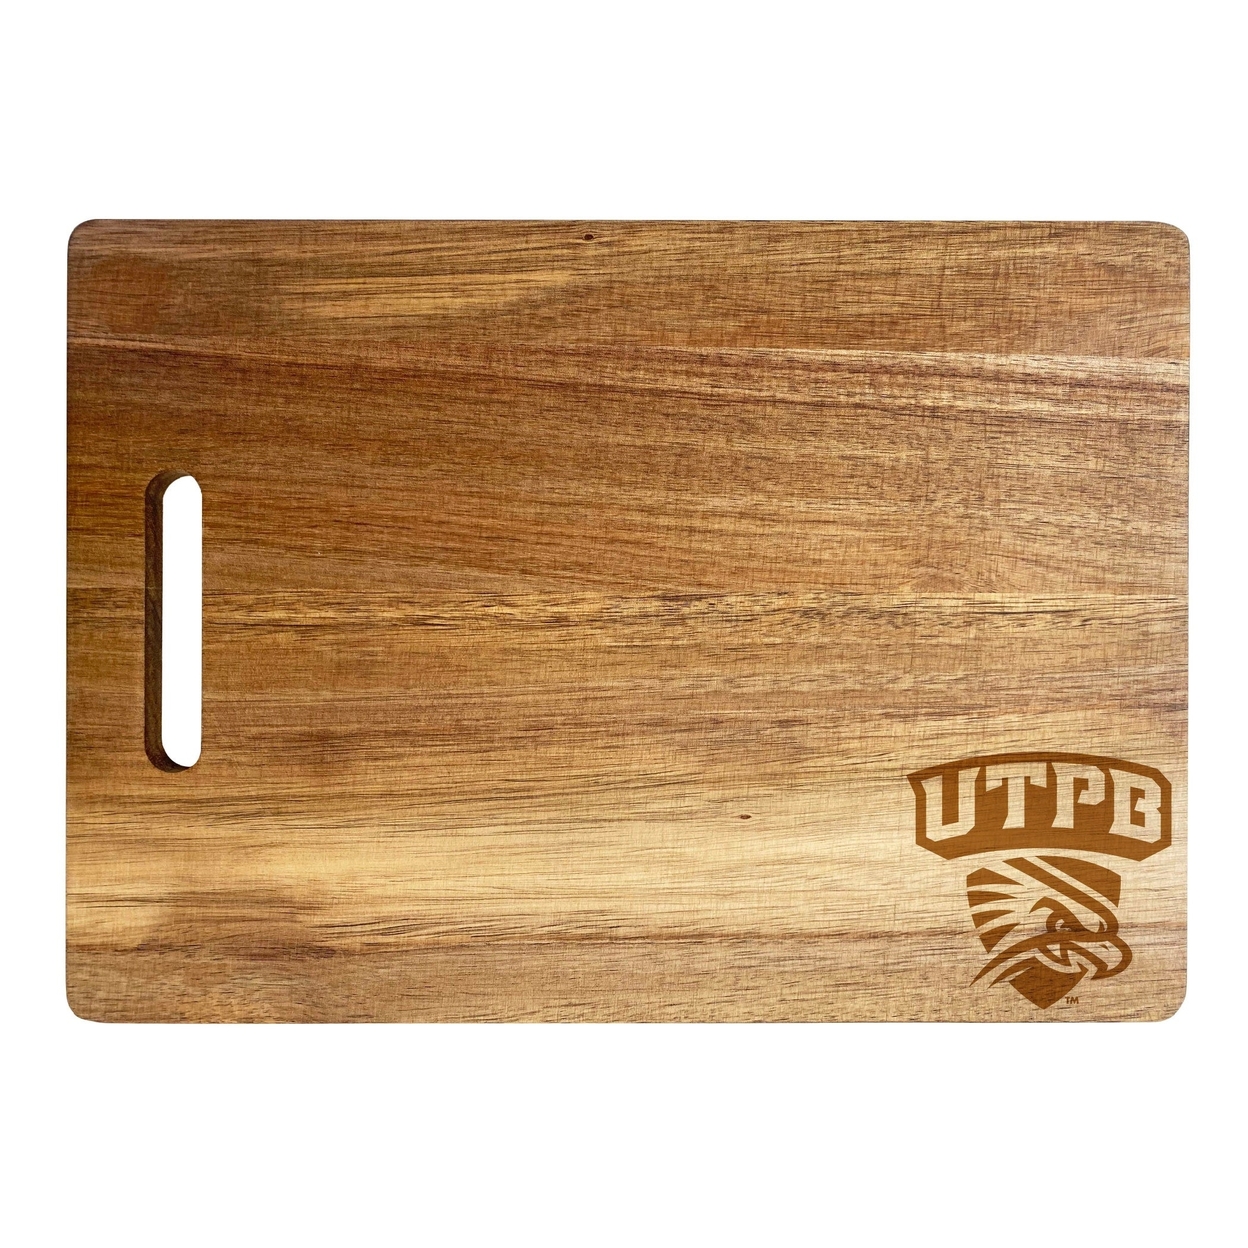 University Of Texas Of The Permian Basin Engraved Wooden Cutting Board 10 X 14 Acacia Wood - Small Engraving